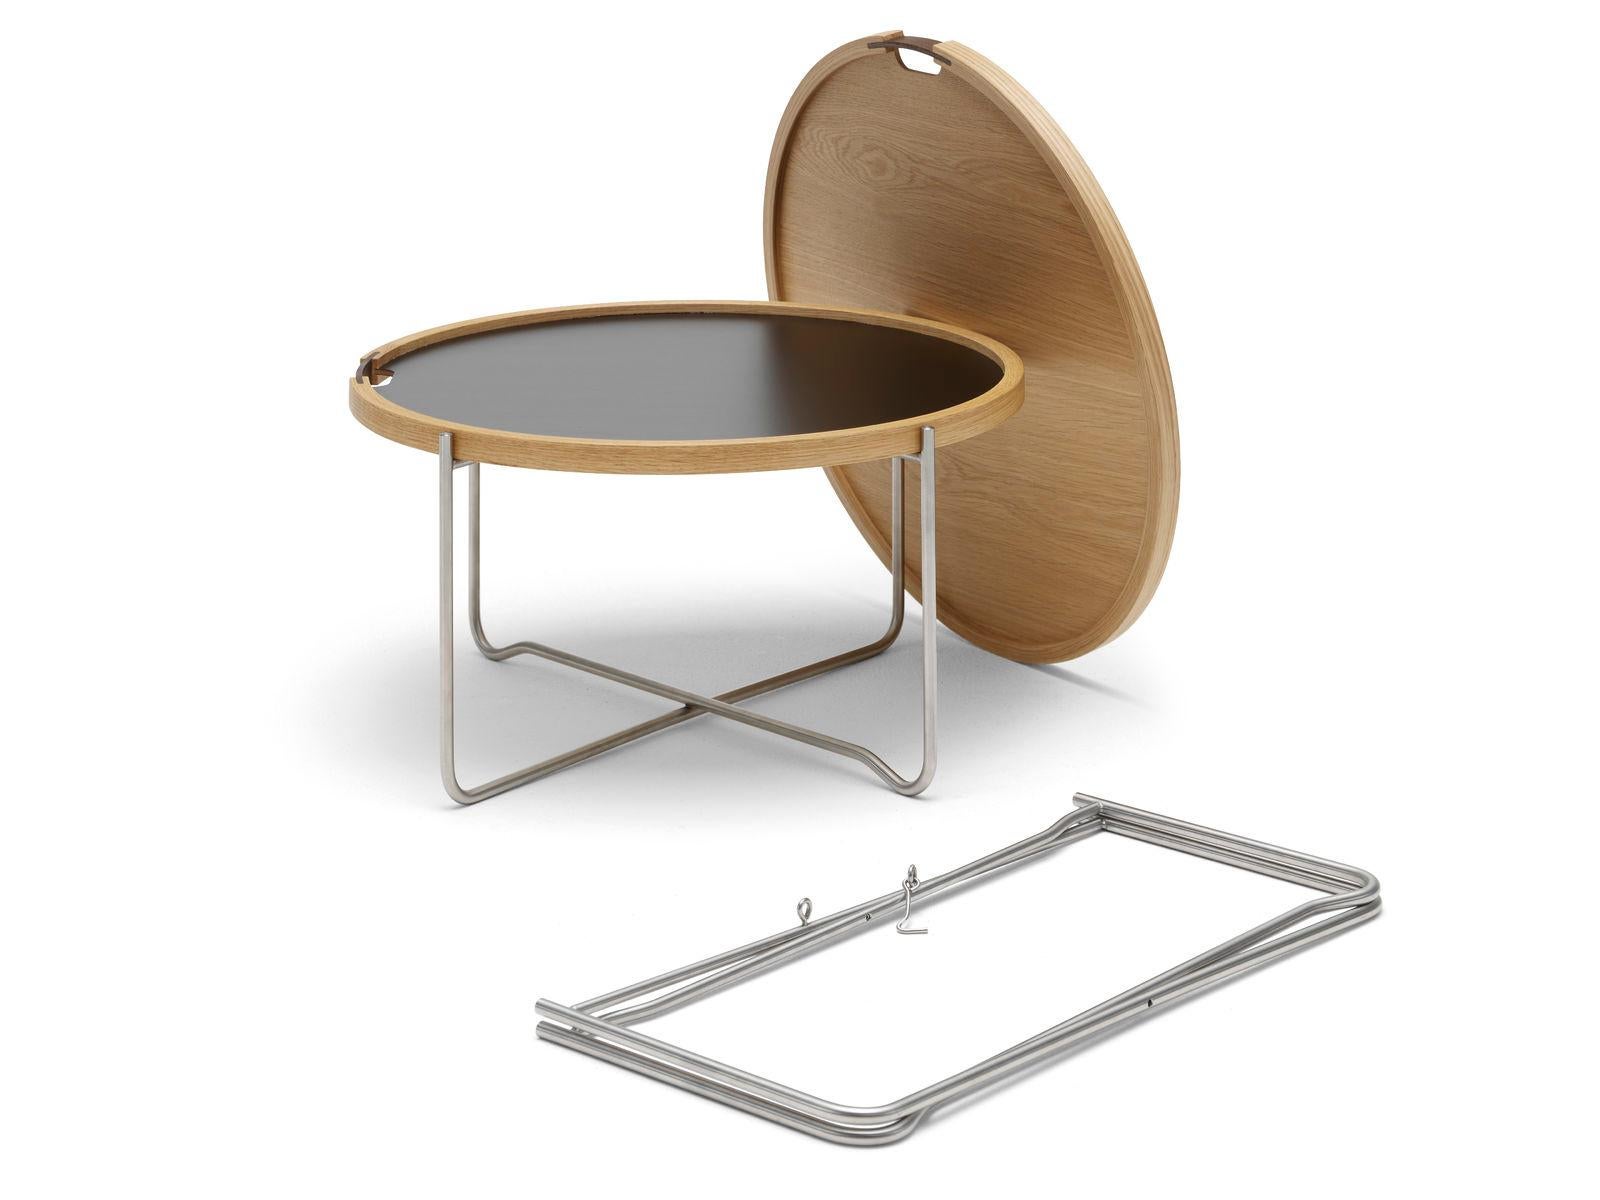 Hans J. Wegner’s CH417 tray table is a clear example of his ability to create functional and, at the same time, beautiful, unique furniture.